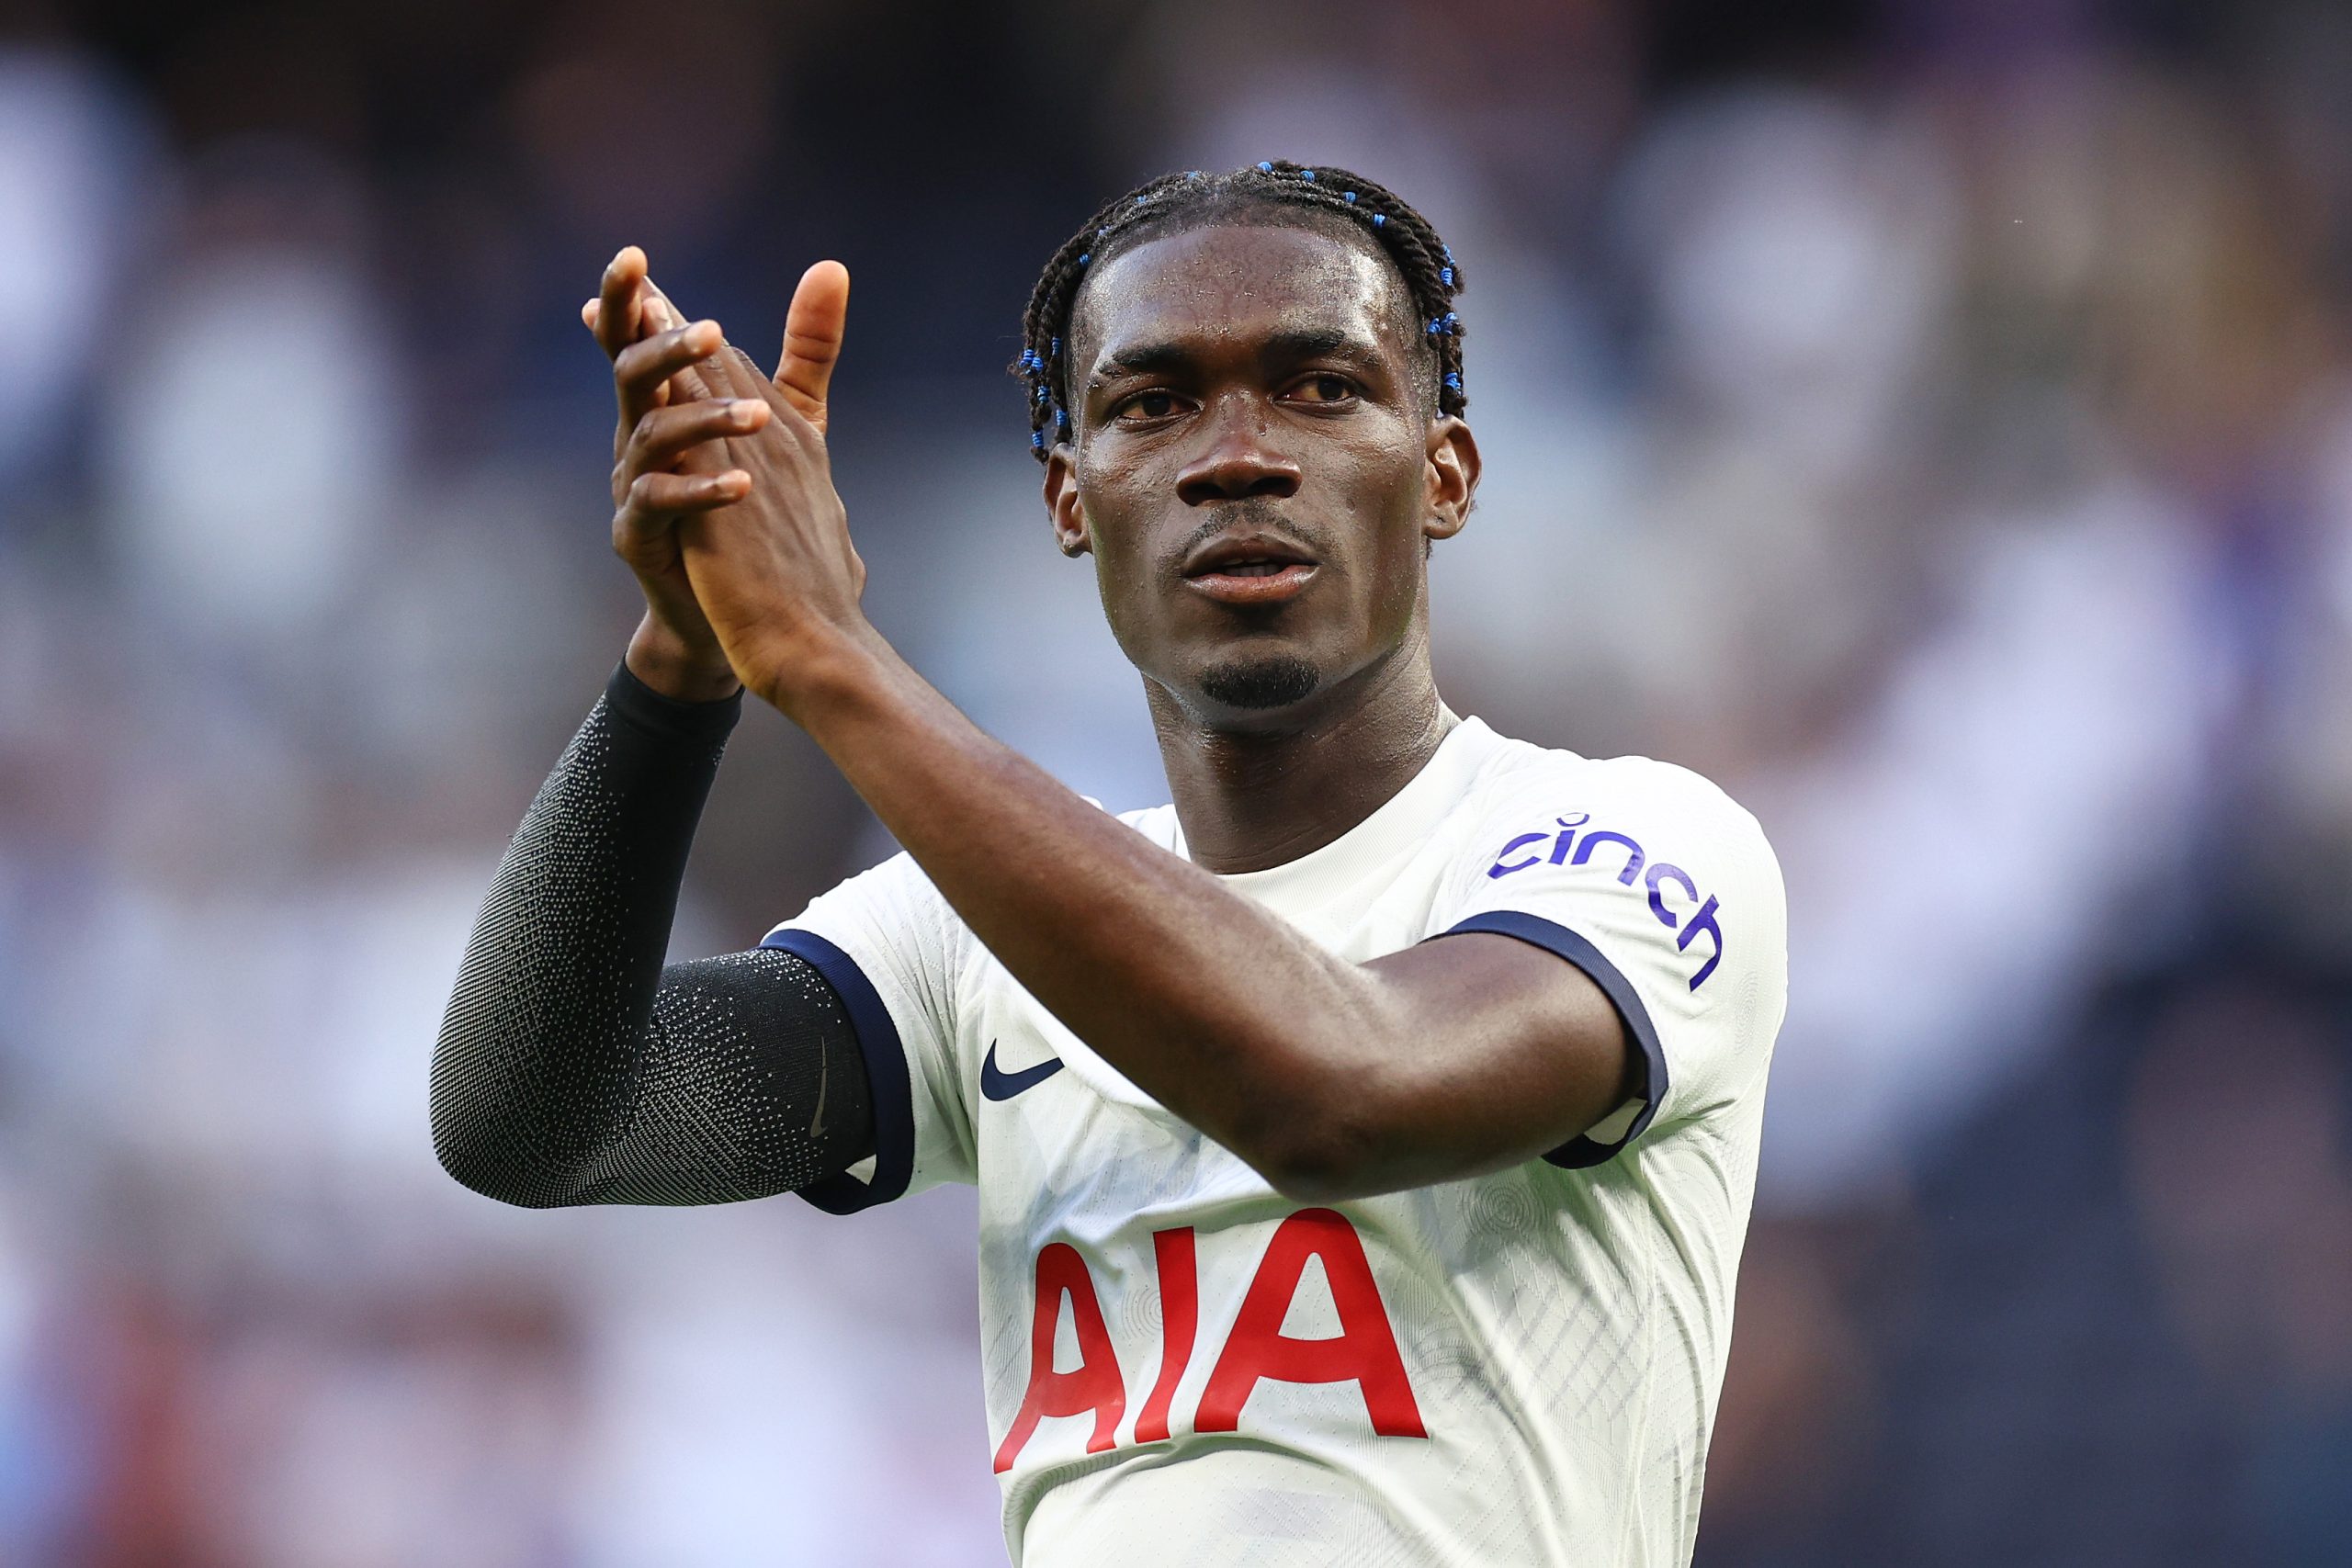 Bissouma stays put as Spurs see a role for the midfielder despite inconsistency